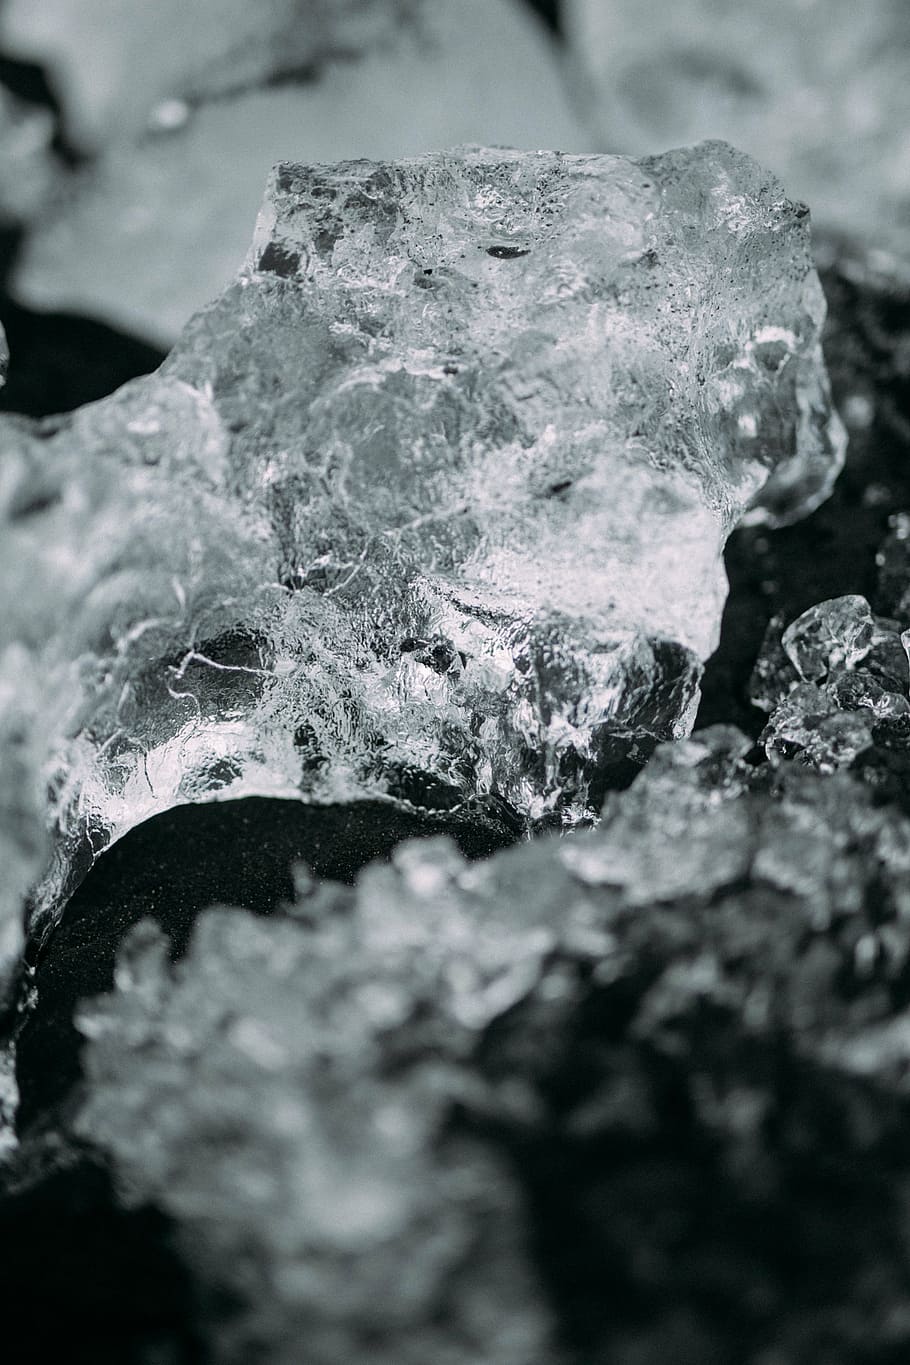 close-up photo, ice cube, rock, water, nature, ice, selective focus, close-up, crystal, frozen